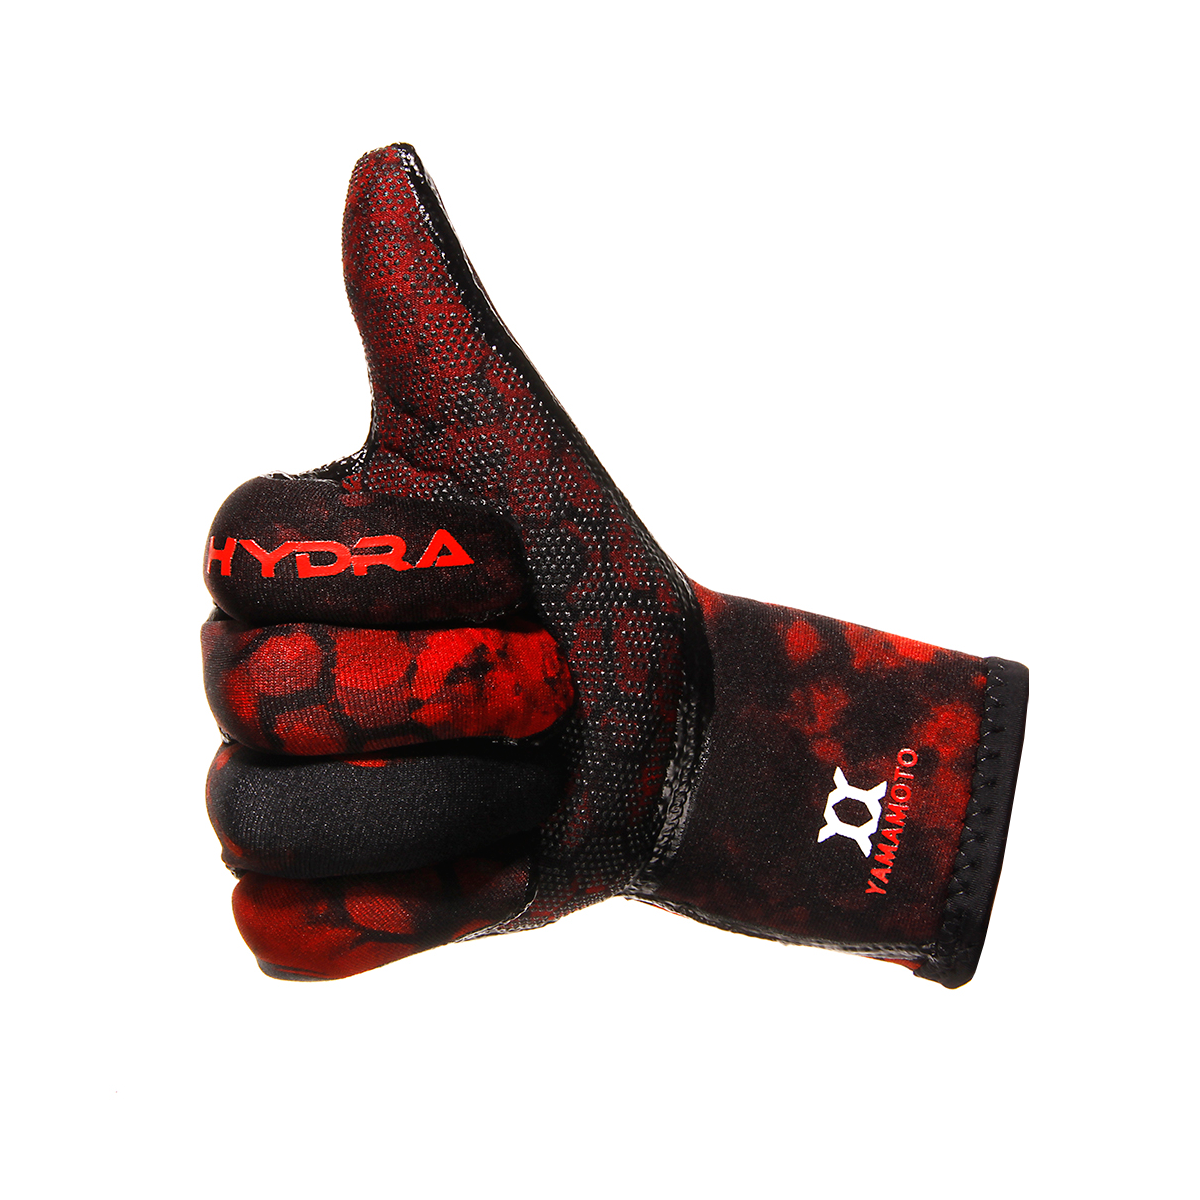 https://www.eurodiveshop.com/media/catalog/product/cache/aef1cd55a9840150c0db65a822948784/h/y/hydra-sport-gloves-red-camo77.png